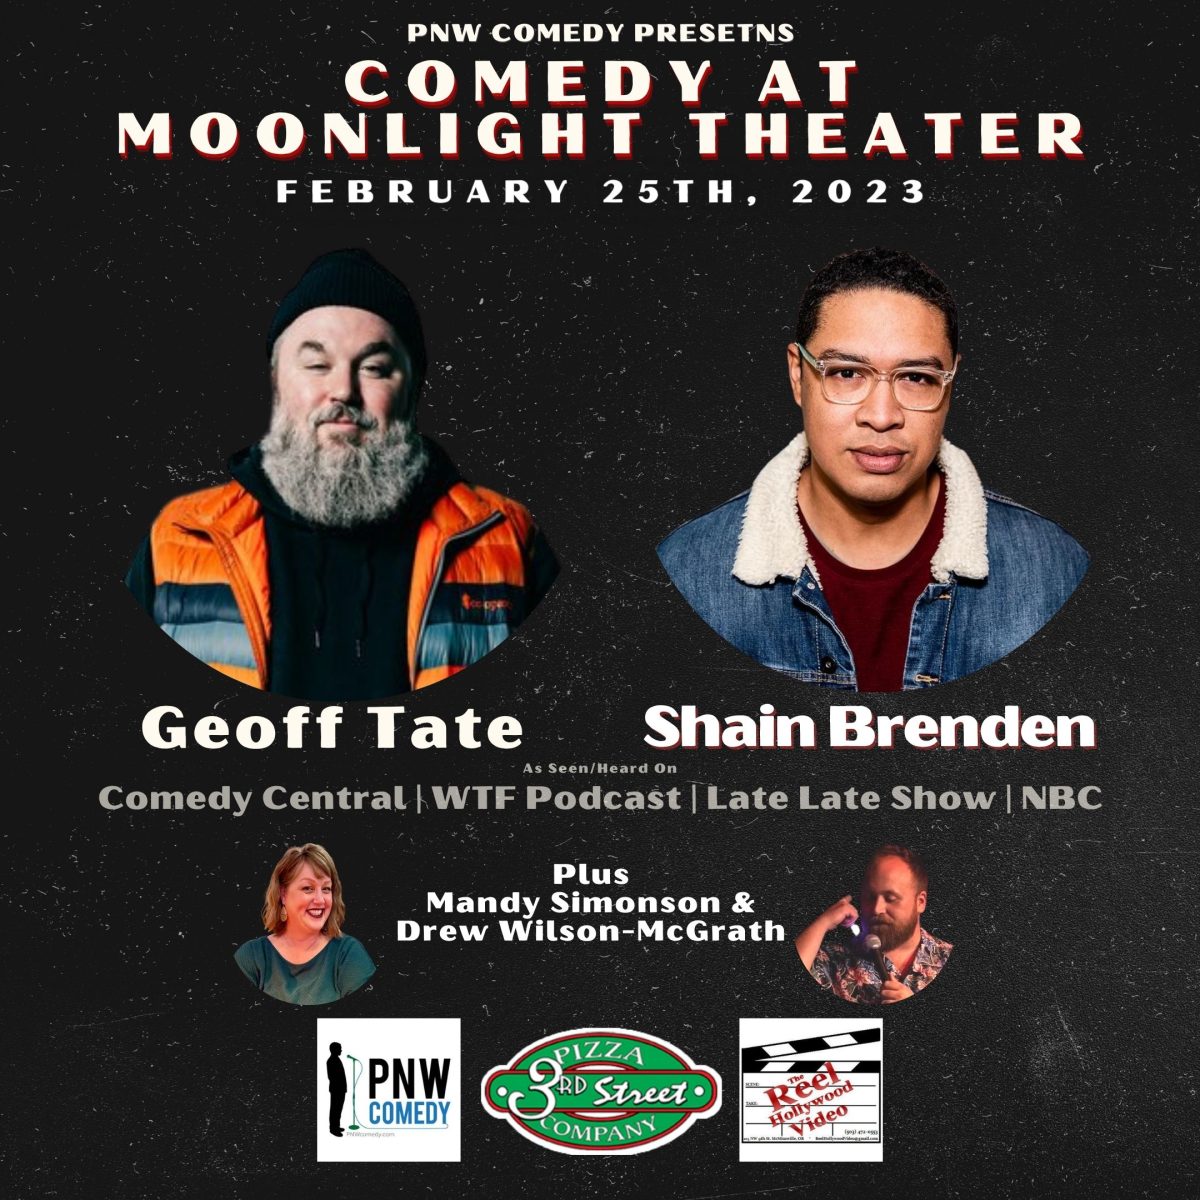 Geoff Tate (WTF Podcast, Late Late Show, Comedy Central) & Shain Brenden (NBC) in McMinnville, OR – Feb 25th, 2023